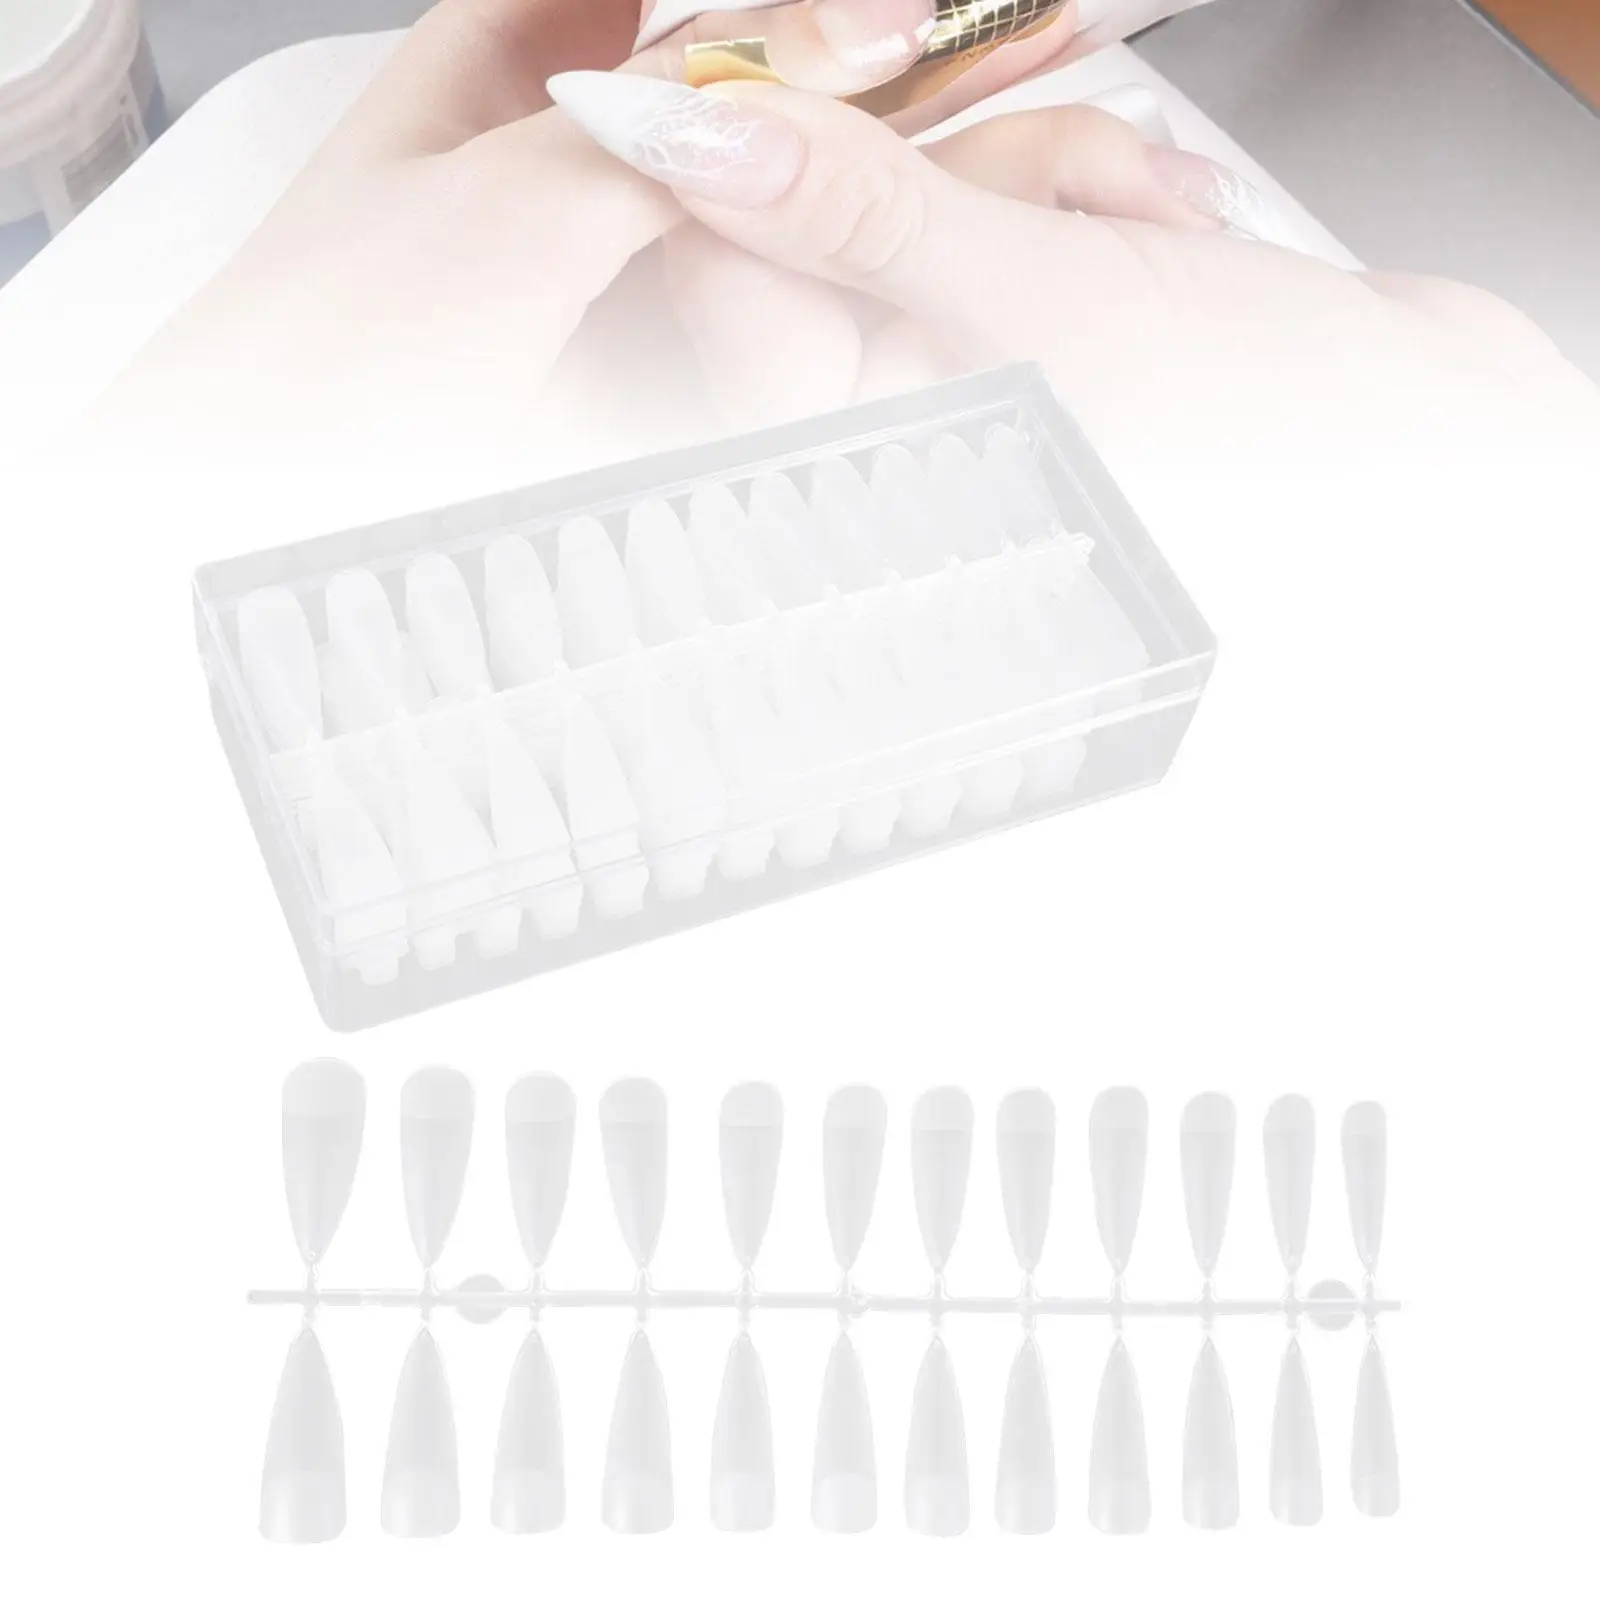 240x Gel Nail Tips 10-12 Sizes Nails Art Clear for Soak Off Nail Extensions Fake Gel Nail Tips Nail Extensions Tips for Home DIY